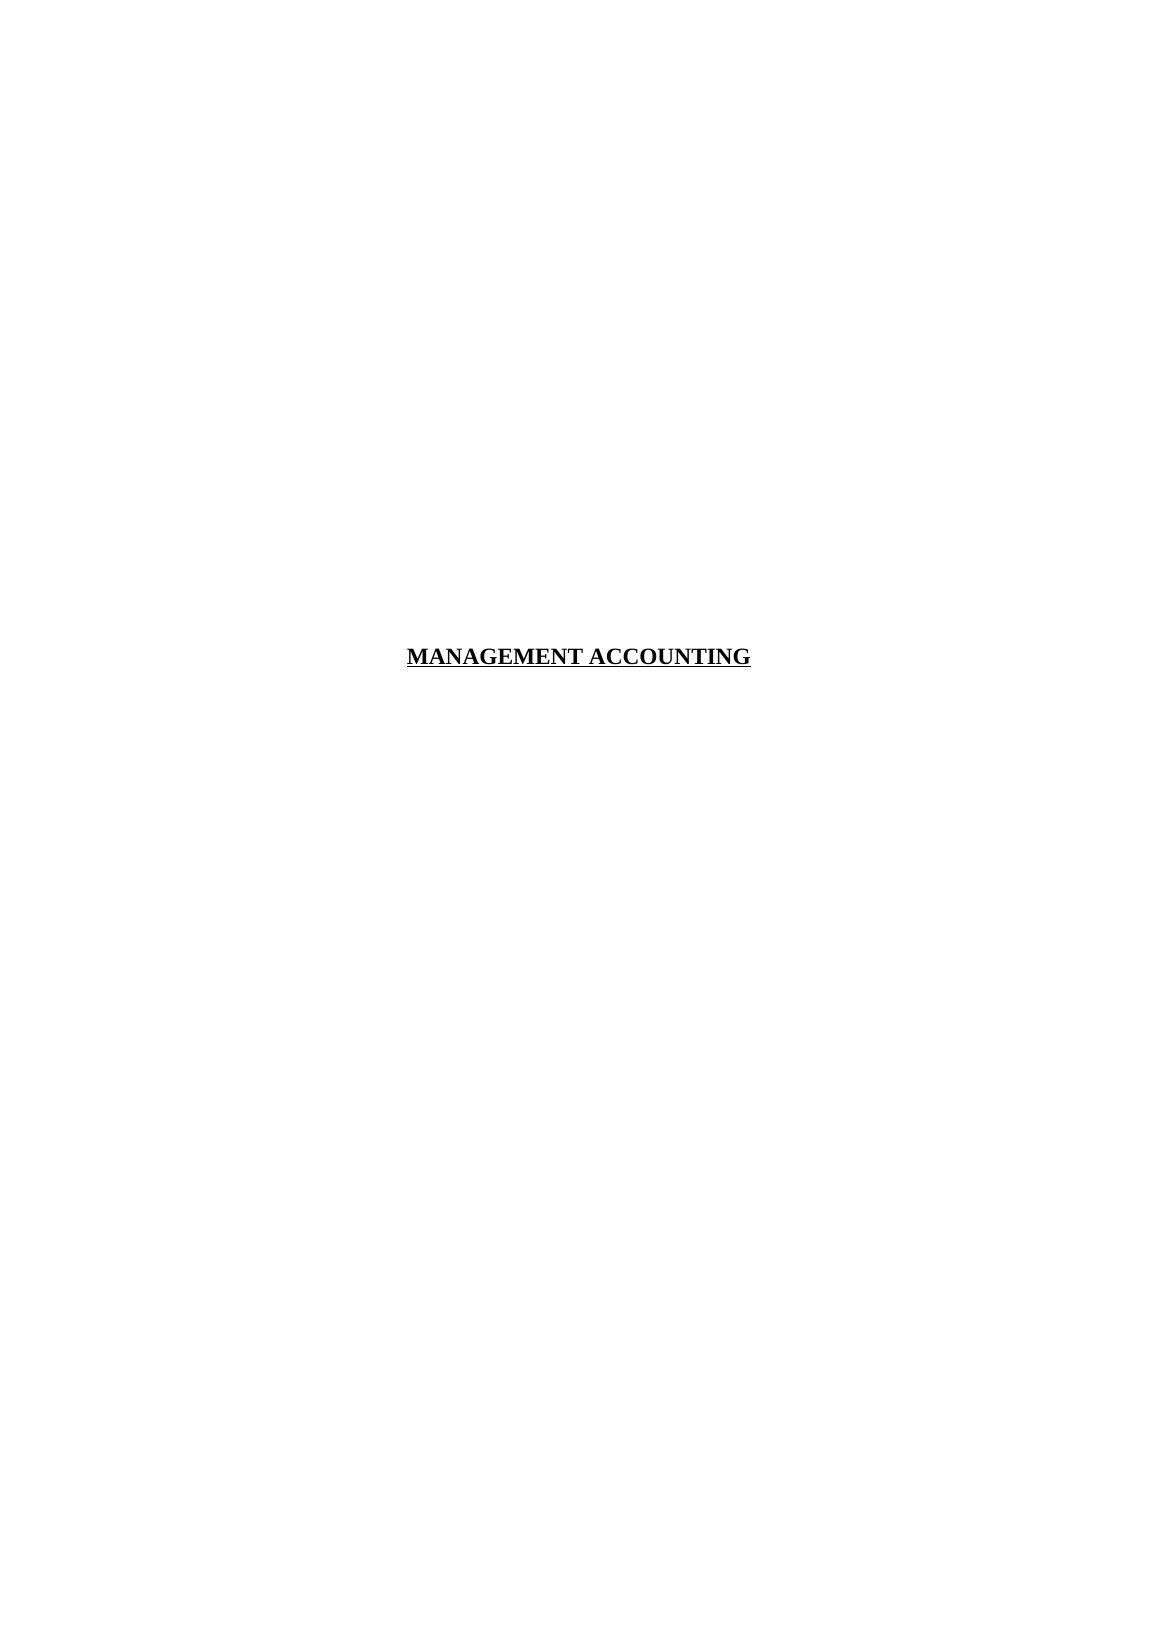 ACC202 - Management Accounting Assignment_1